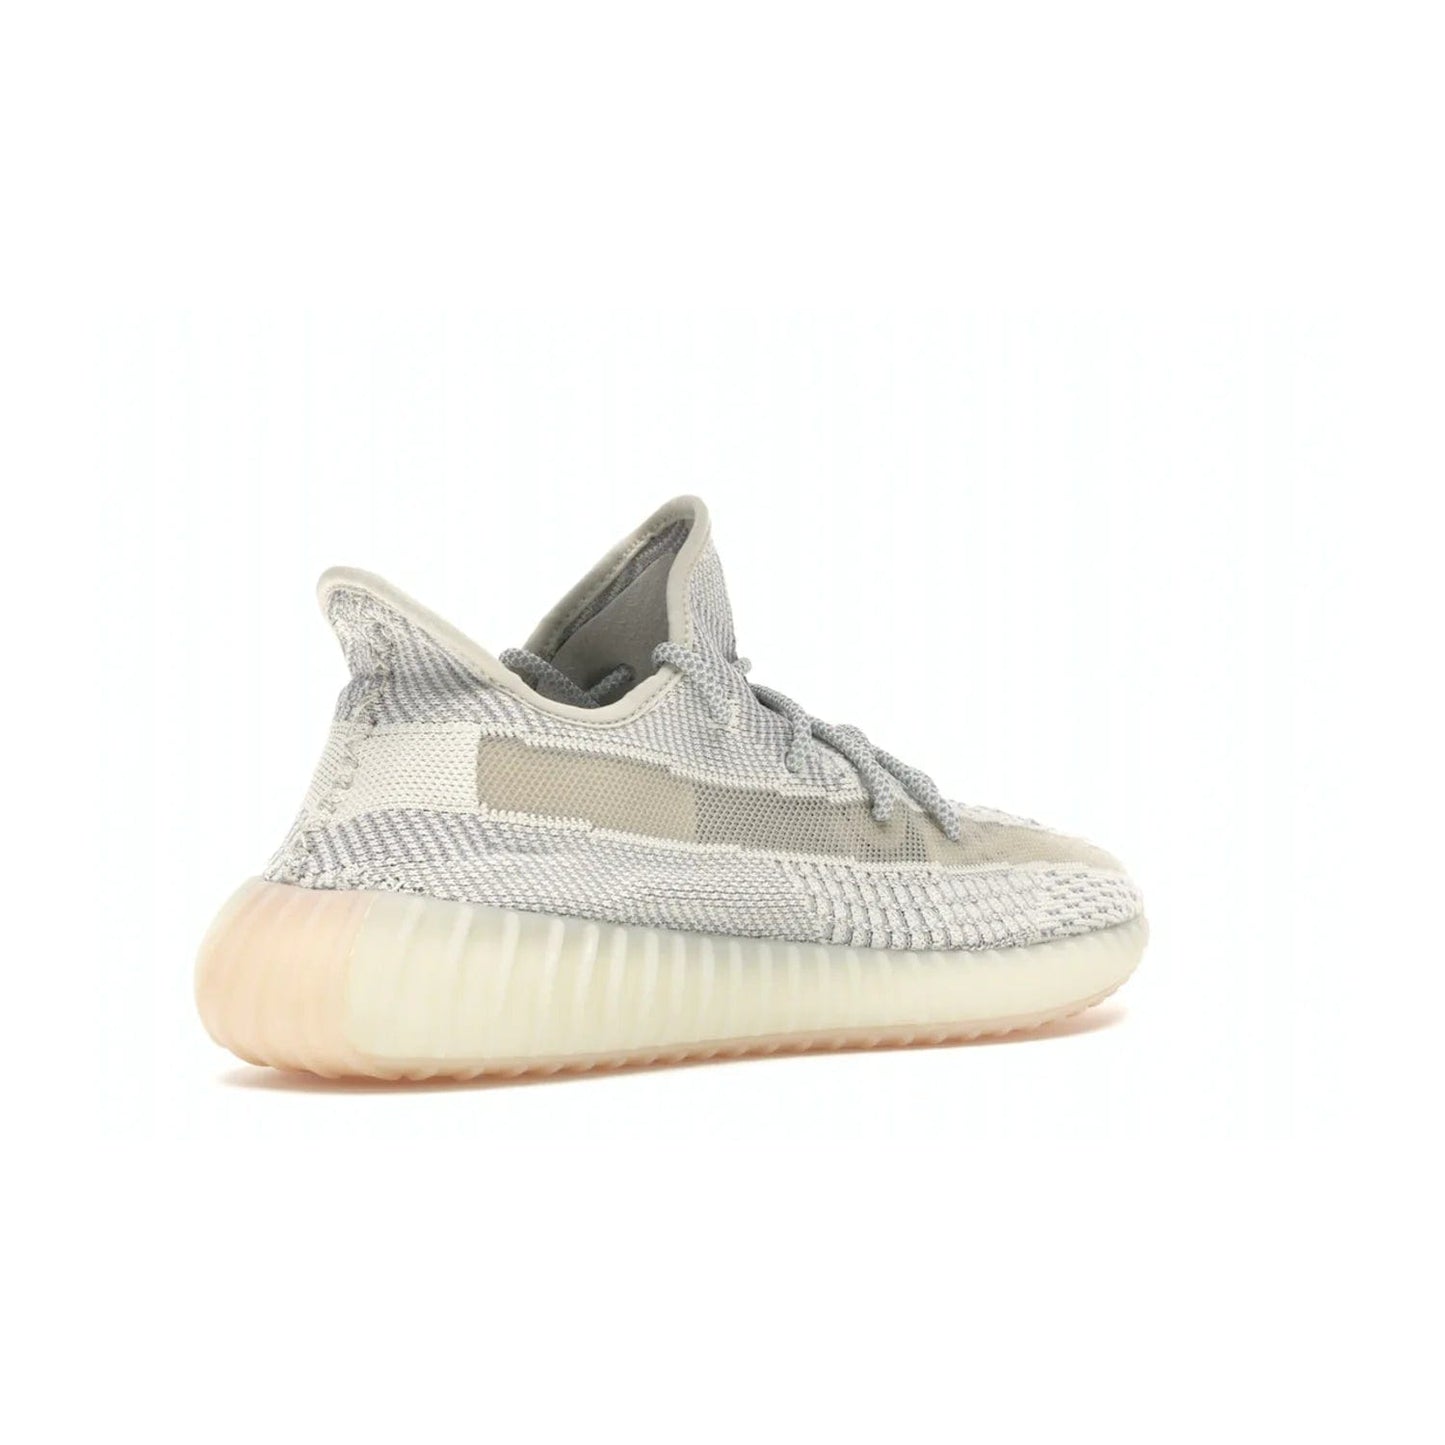 adidas Yeezy Boost 350 V2 Lundmark (Non Reflective) - Image 33 - Only at www.BallersClubKickz.com - Shop the exclusive adidas Yeezy Boost 350 V2 Lundmark with a subtle summer color, mesh upper, white-to-cream transitional midsole, light tan outsole, and pink middle stripe. Comfort and style come together in this perfect summer 350 V2. Released on July 11, 2019.